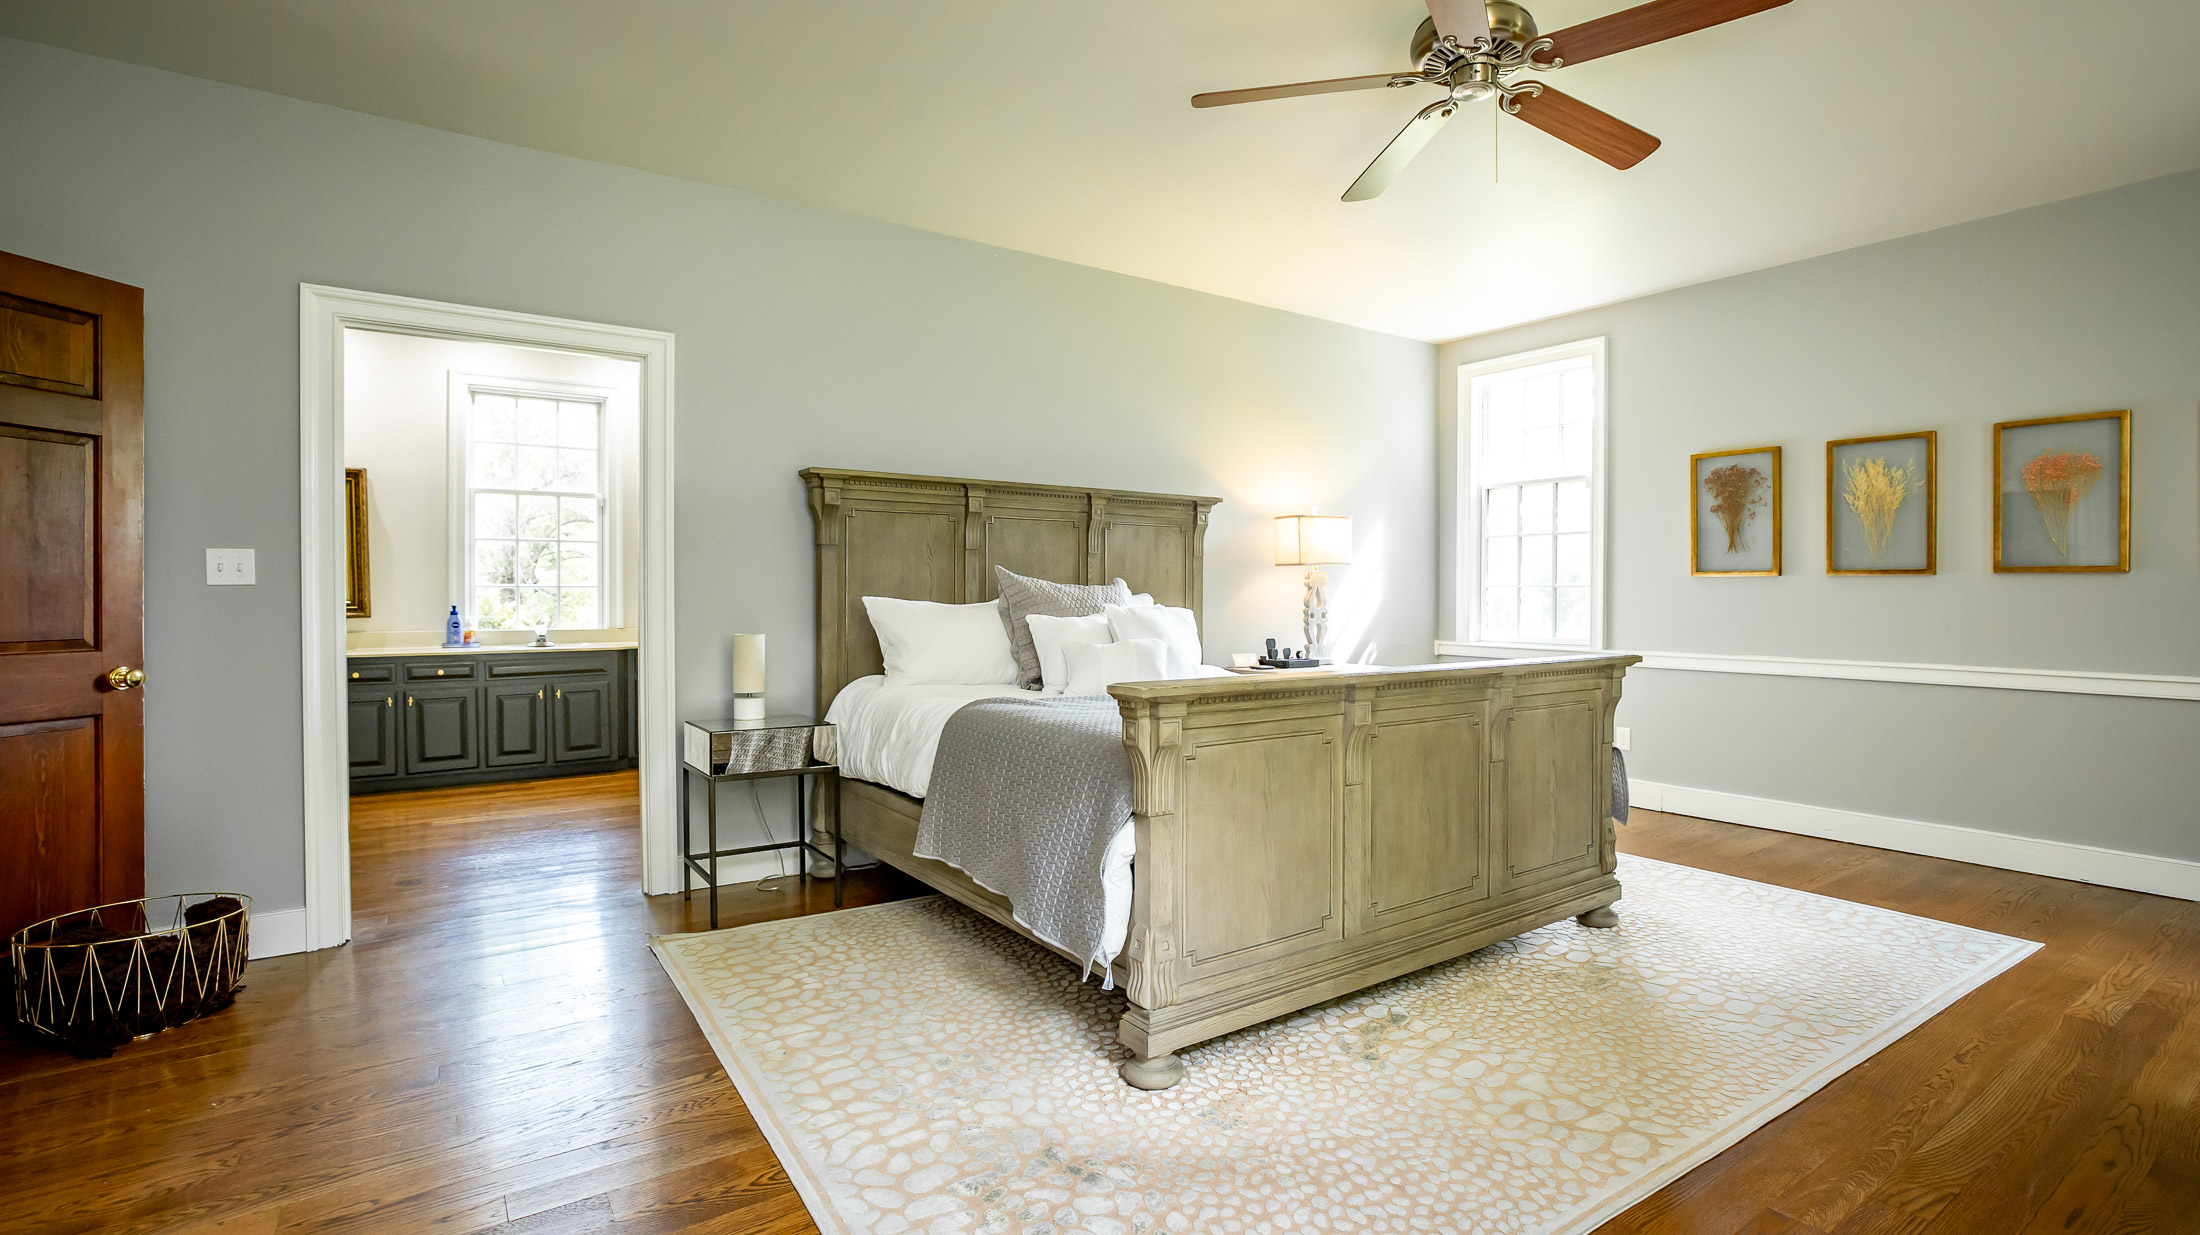 Immaculate Colonial Revival that just wants to entertain - bluegrassteam